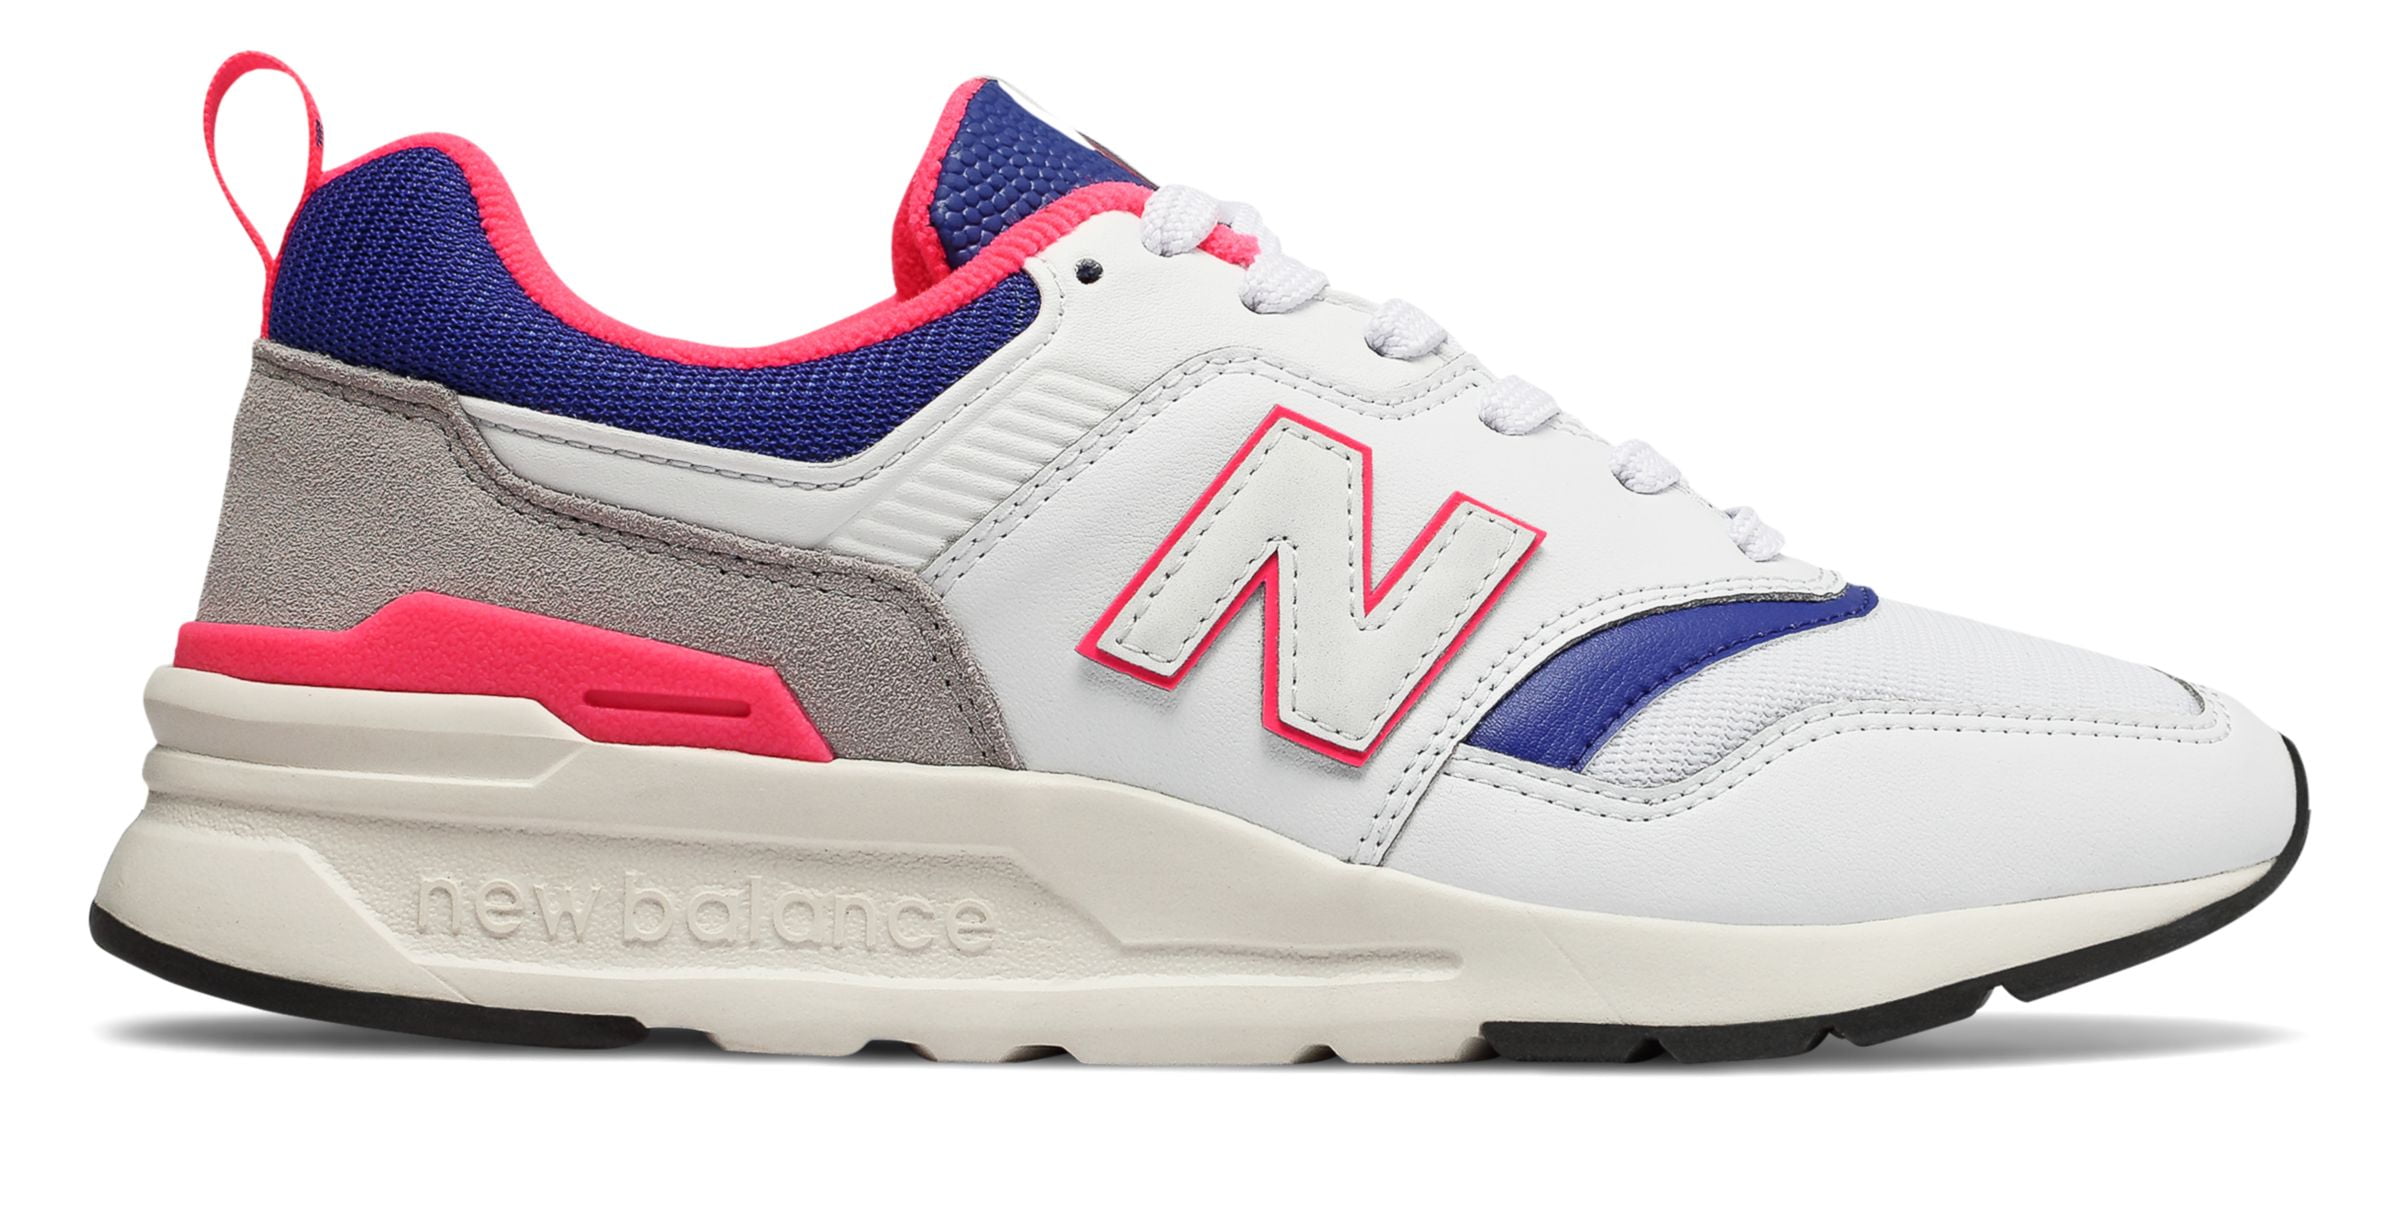 New Balance - New Balance Women's 997H Classic Shoes White with Blue